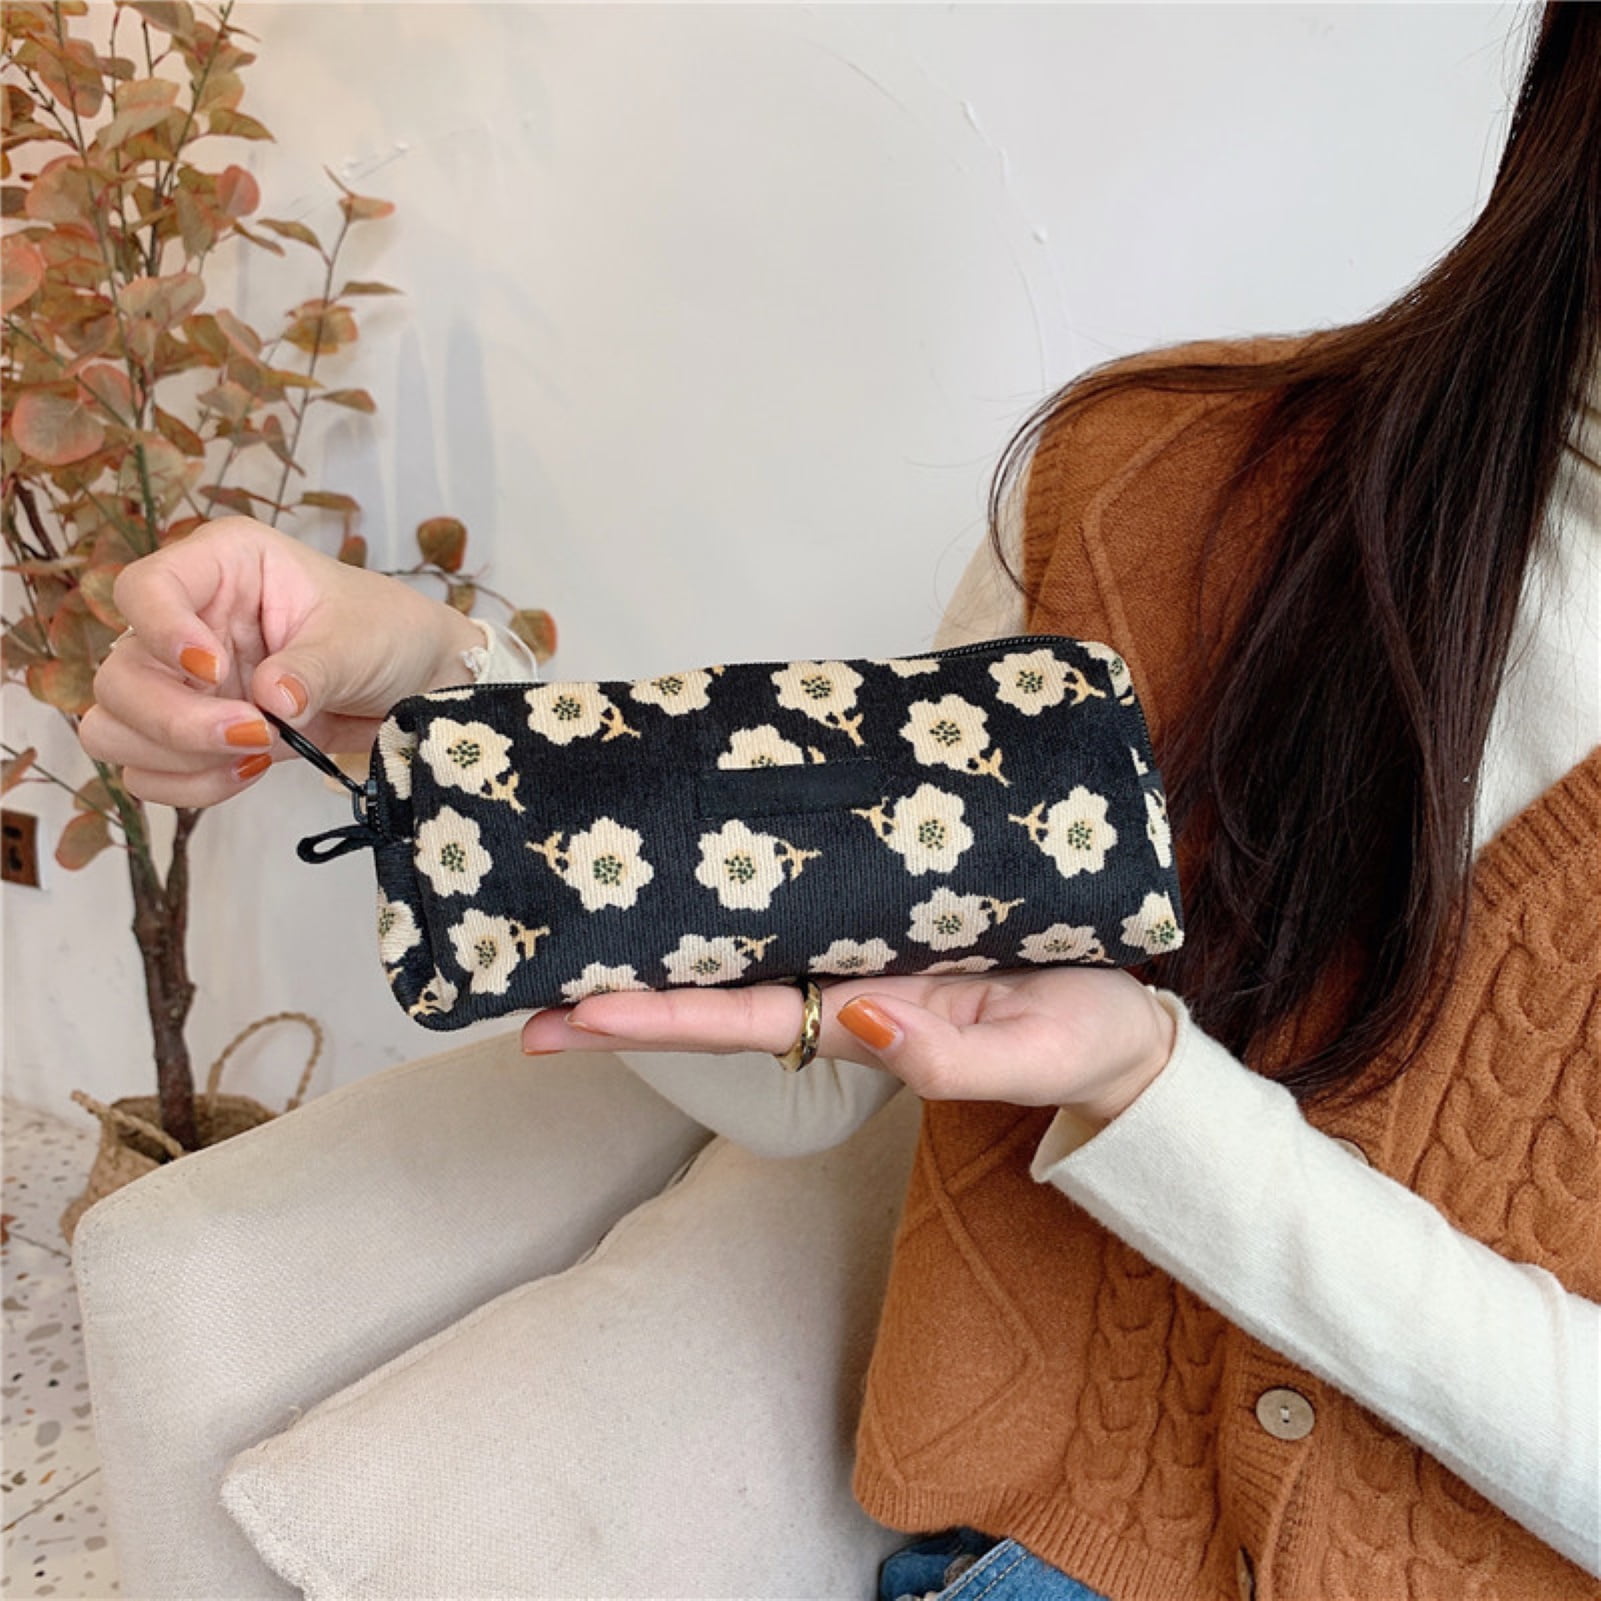 Blondie-8 Comfortable Durable Environmentally Friendly Lightweight Luxurious Soft Inner Fabric Leather Wallet Waterproof